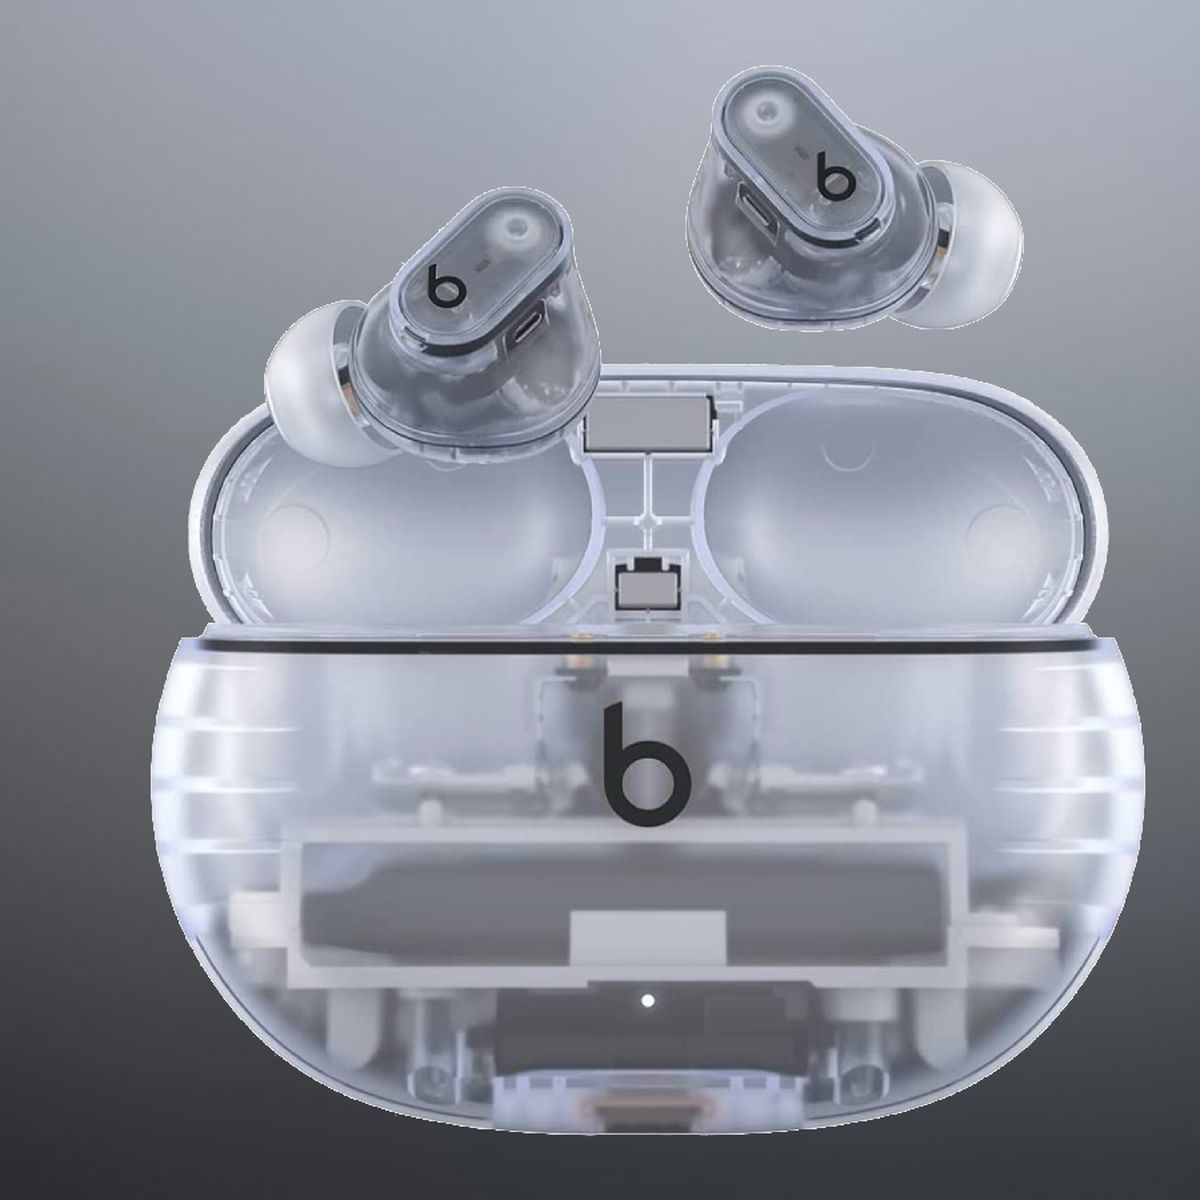 Beats Studio Buds+ Launching in May With New Transparent Design